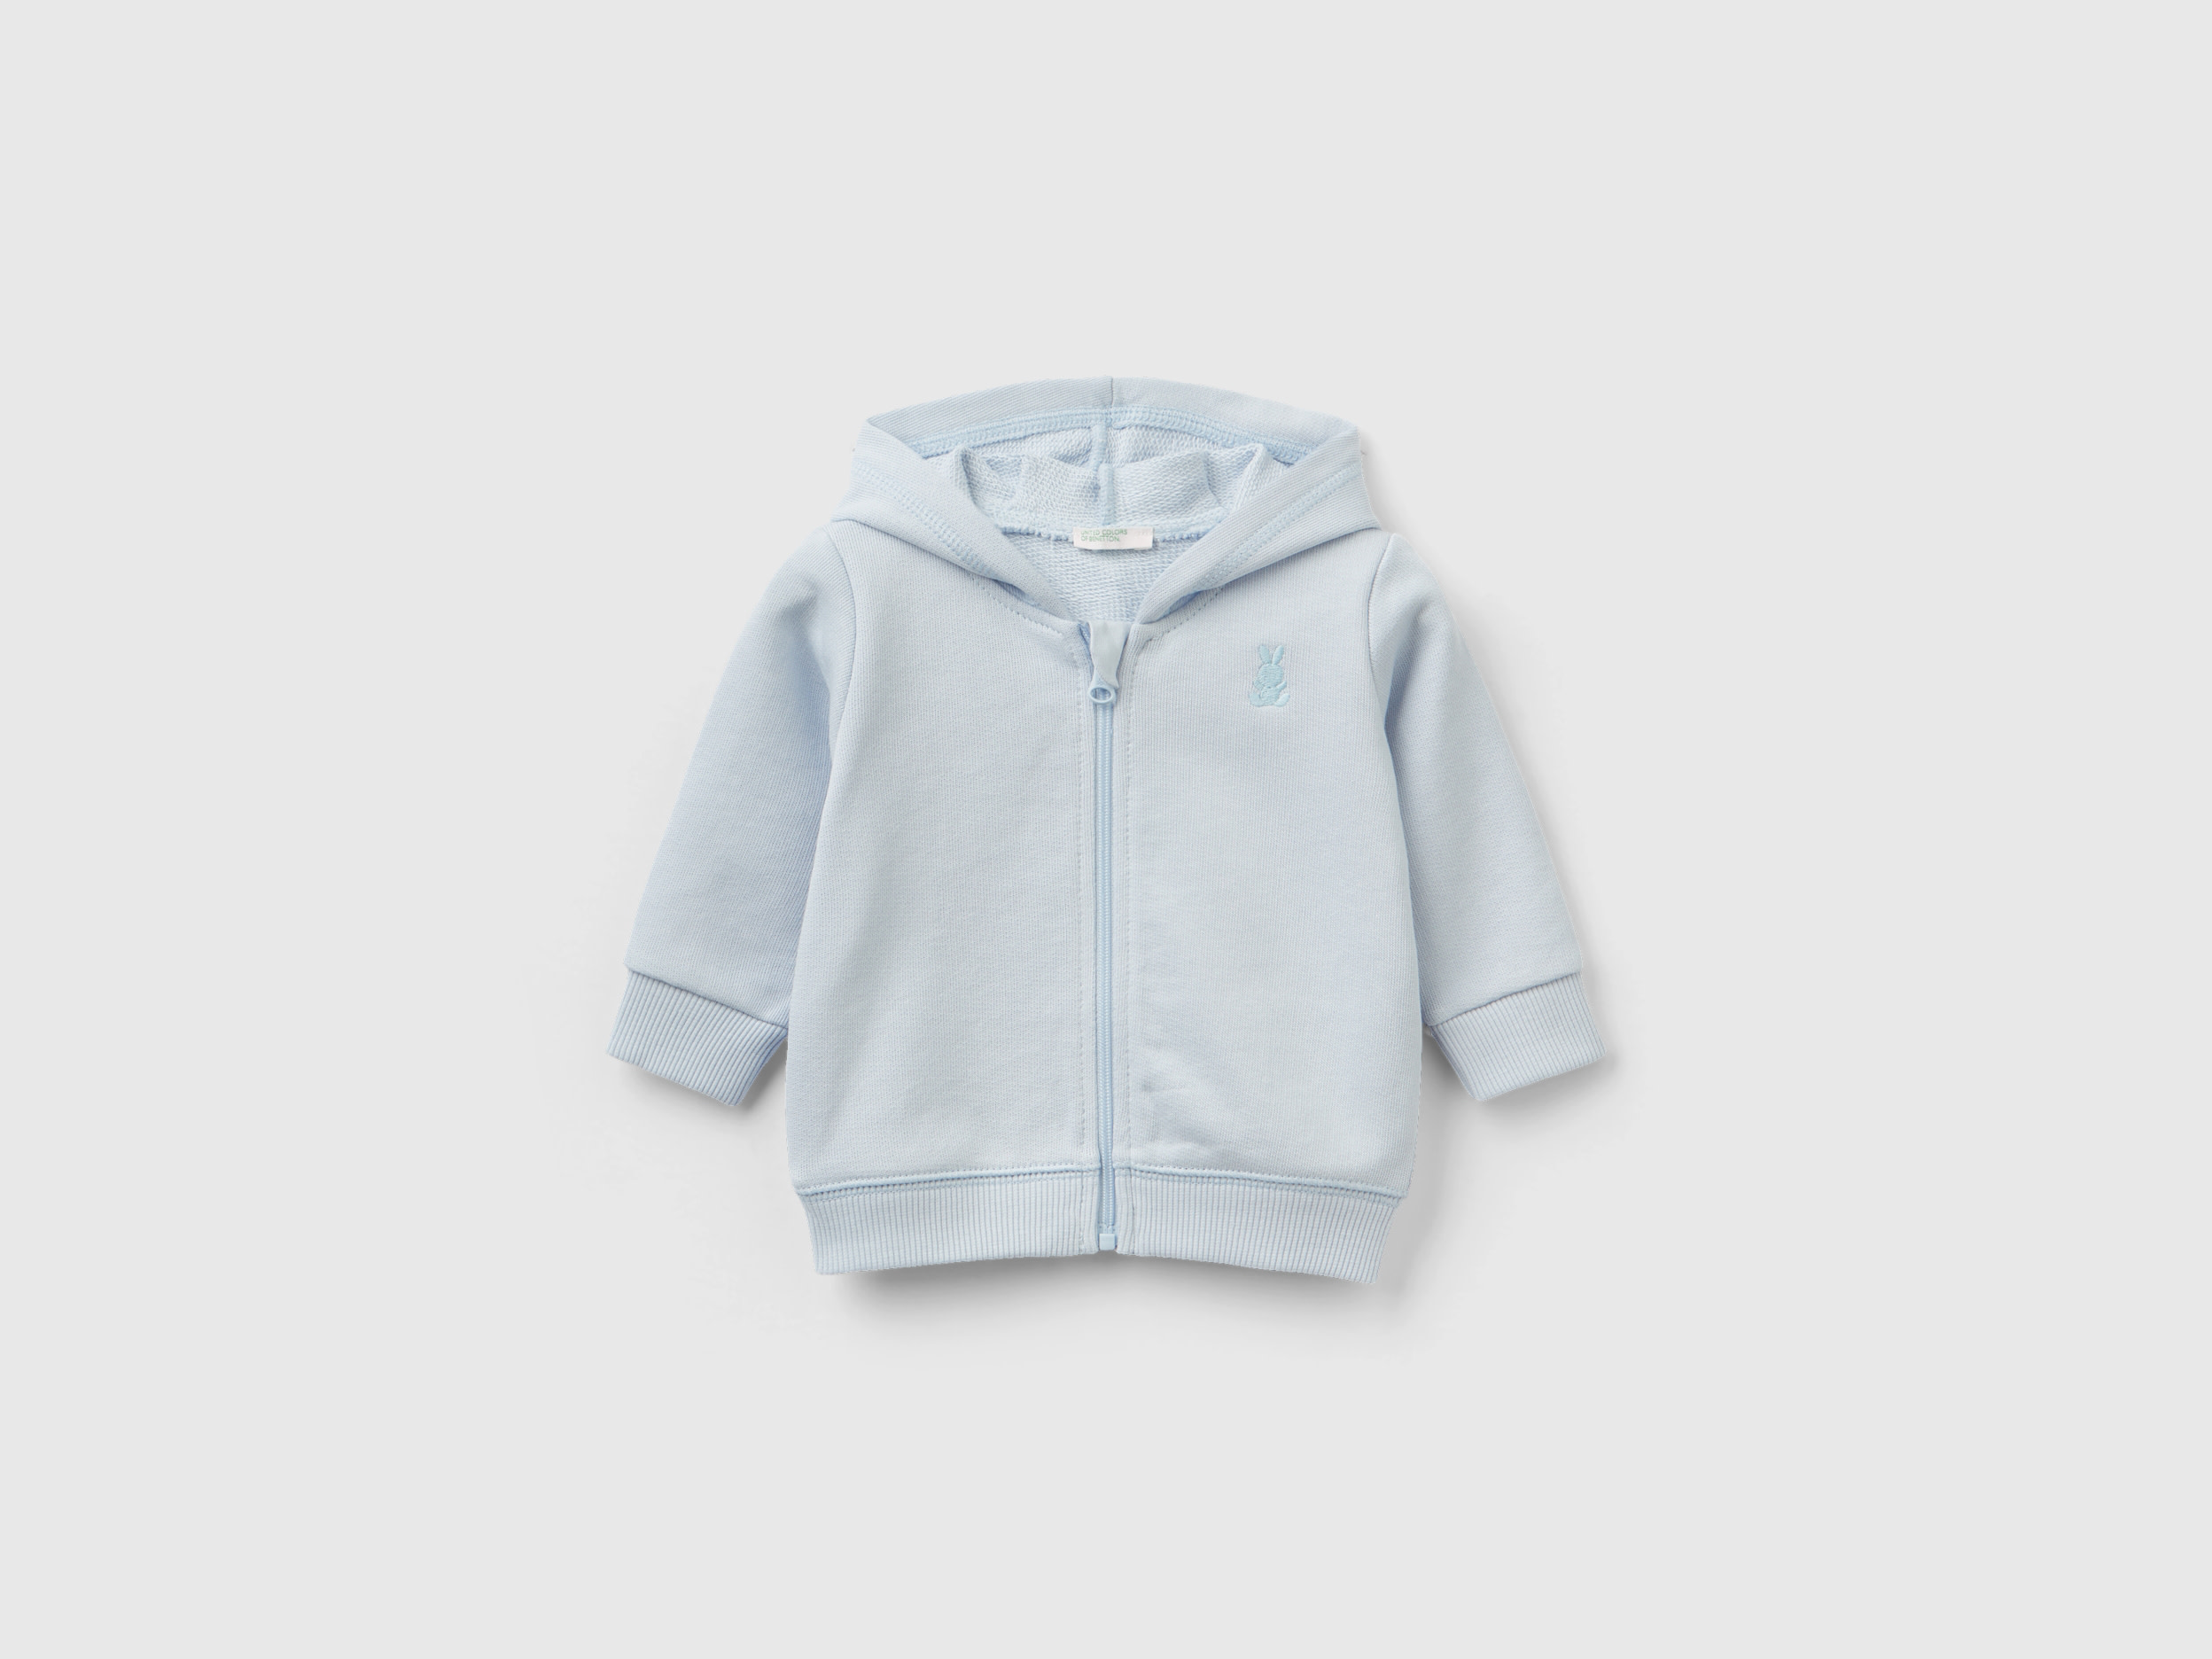 Image of Benetton, Hoodie In Organic Cotton, size 62, Sky Blue, Kids